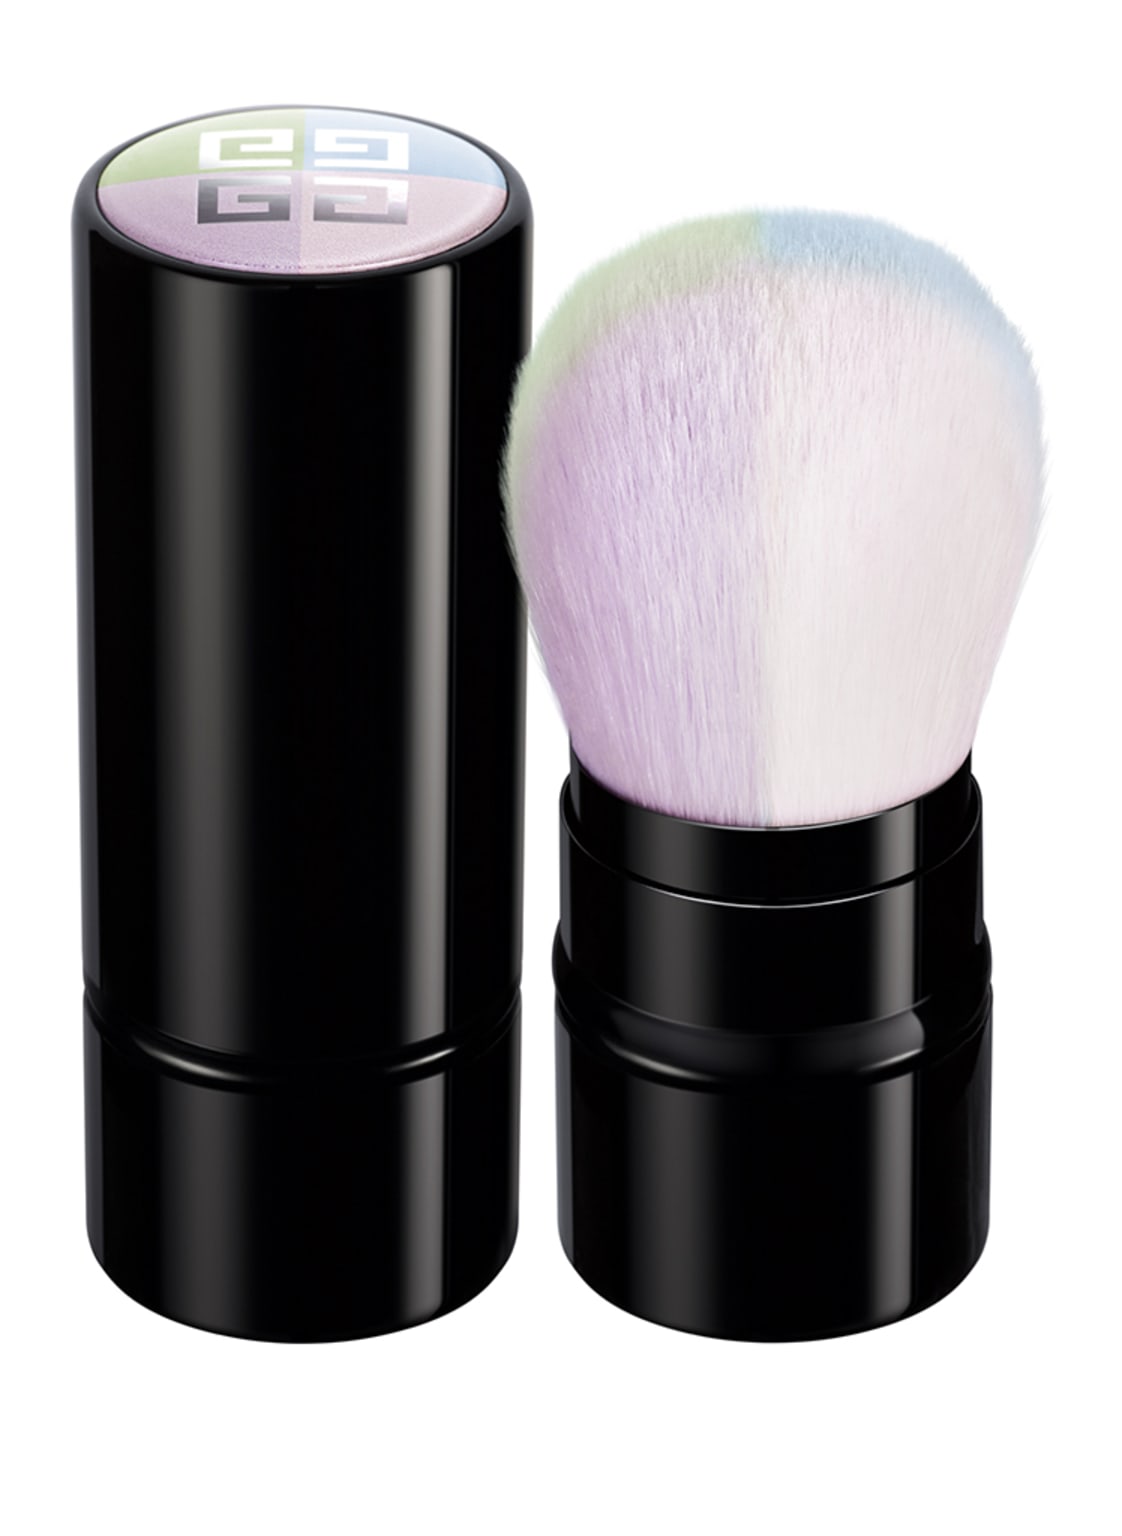 Givenchy Beauty Prisme Libre Brush Puderpinsel von GIVENCHY BEAUTY